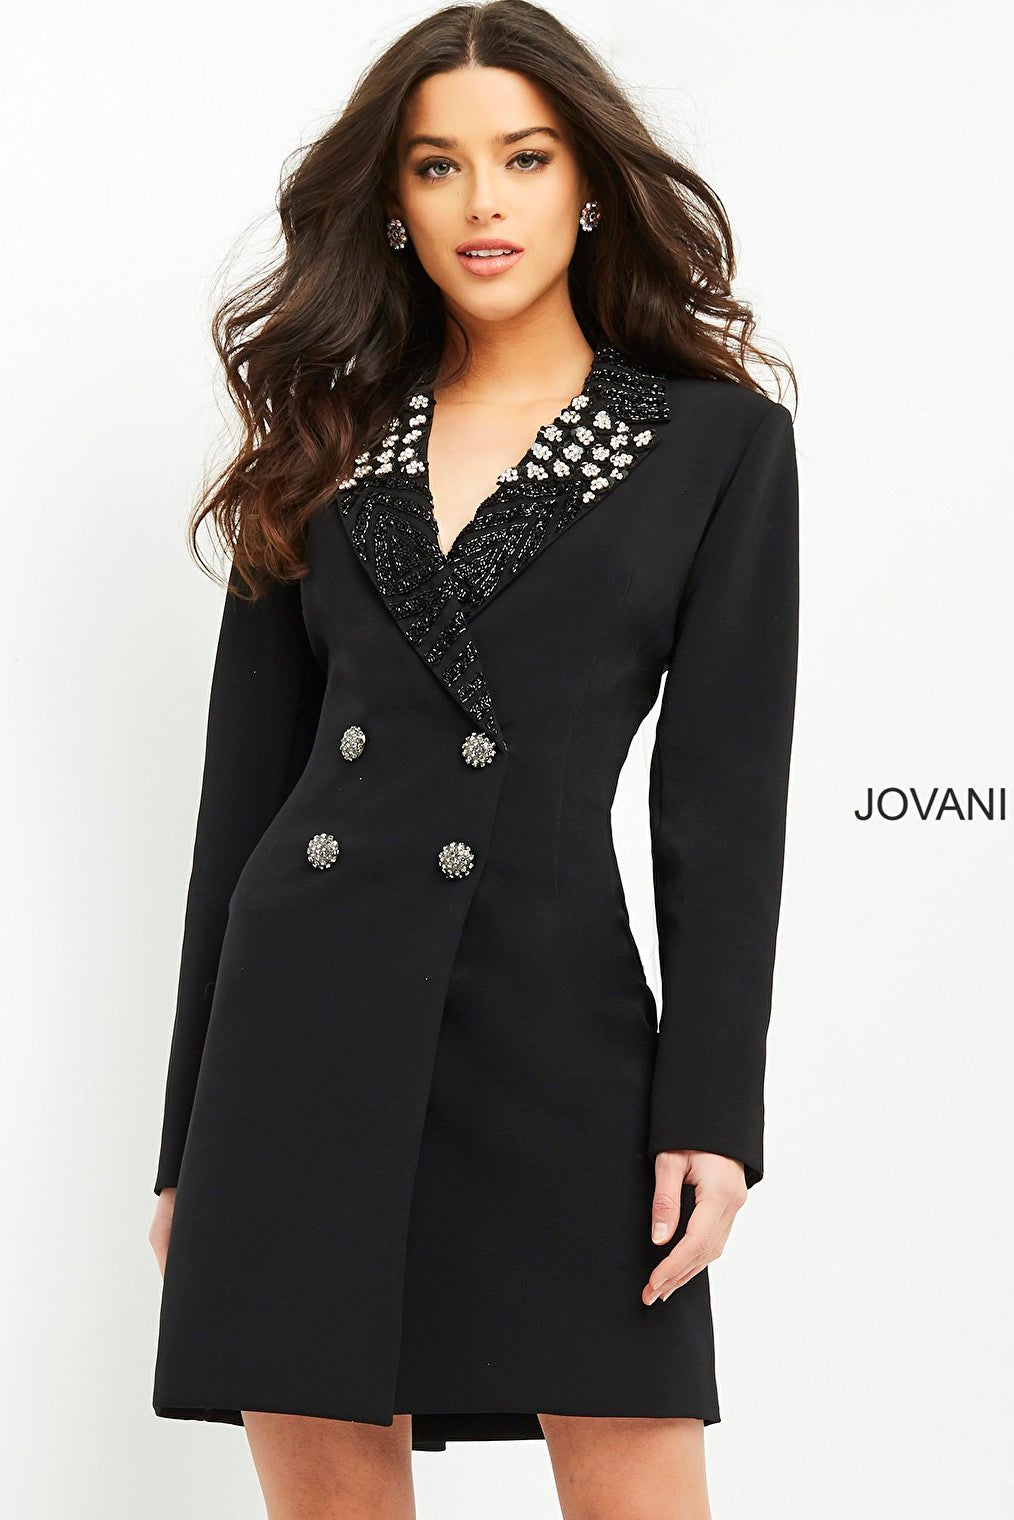 Black double breasted contemporary blazer dress M03416